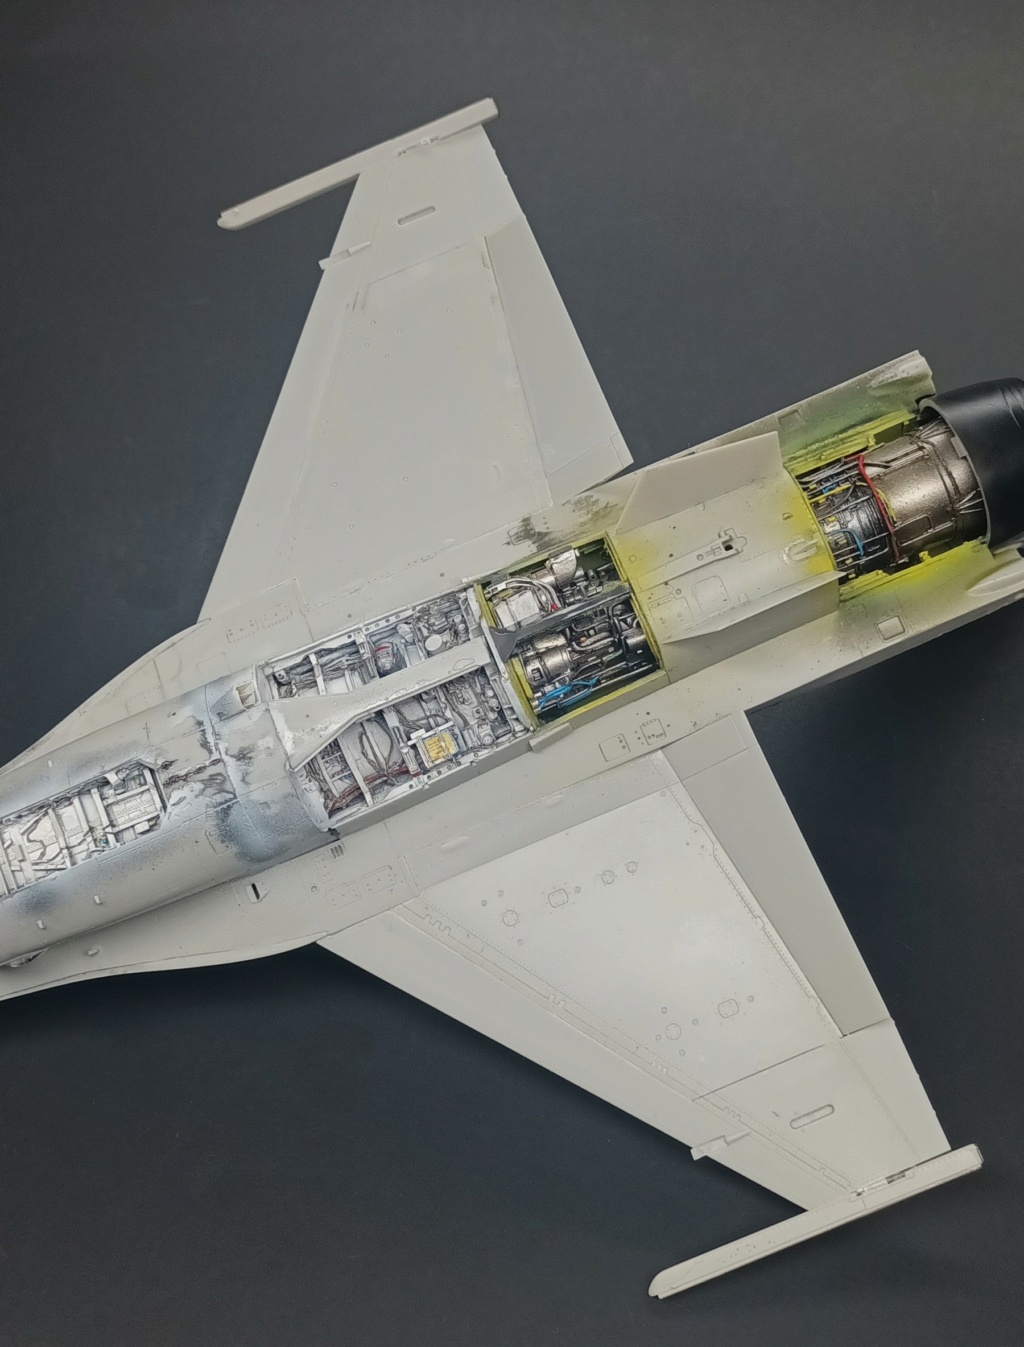 [Kinetic] 1/48  - McDonnell F/A-18A+ Hornet- VFC 12   / Double  [Tamiya] General Dynamics F-16C Fighting Falcon - 64th AGRS  1/48  - Aggressor - Page 3 20240214